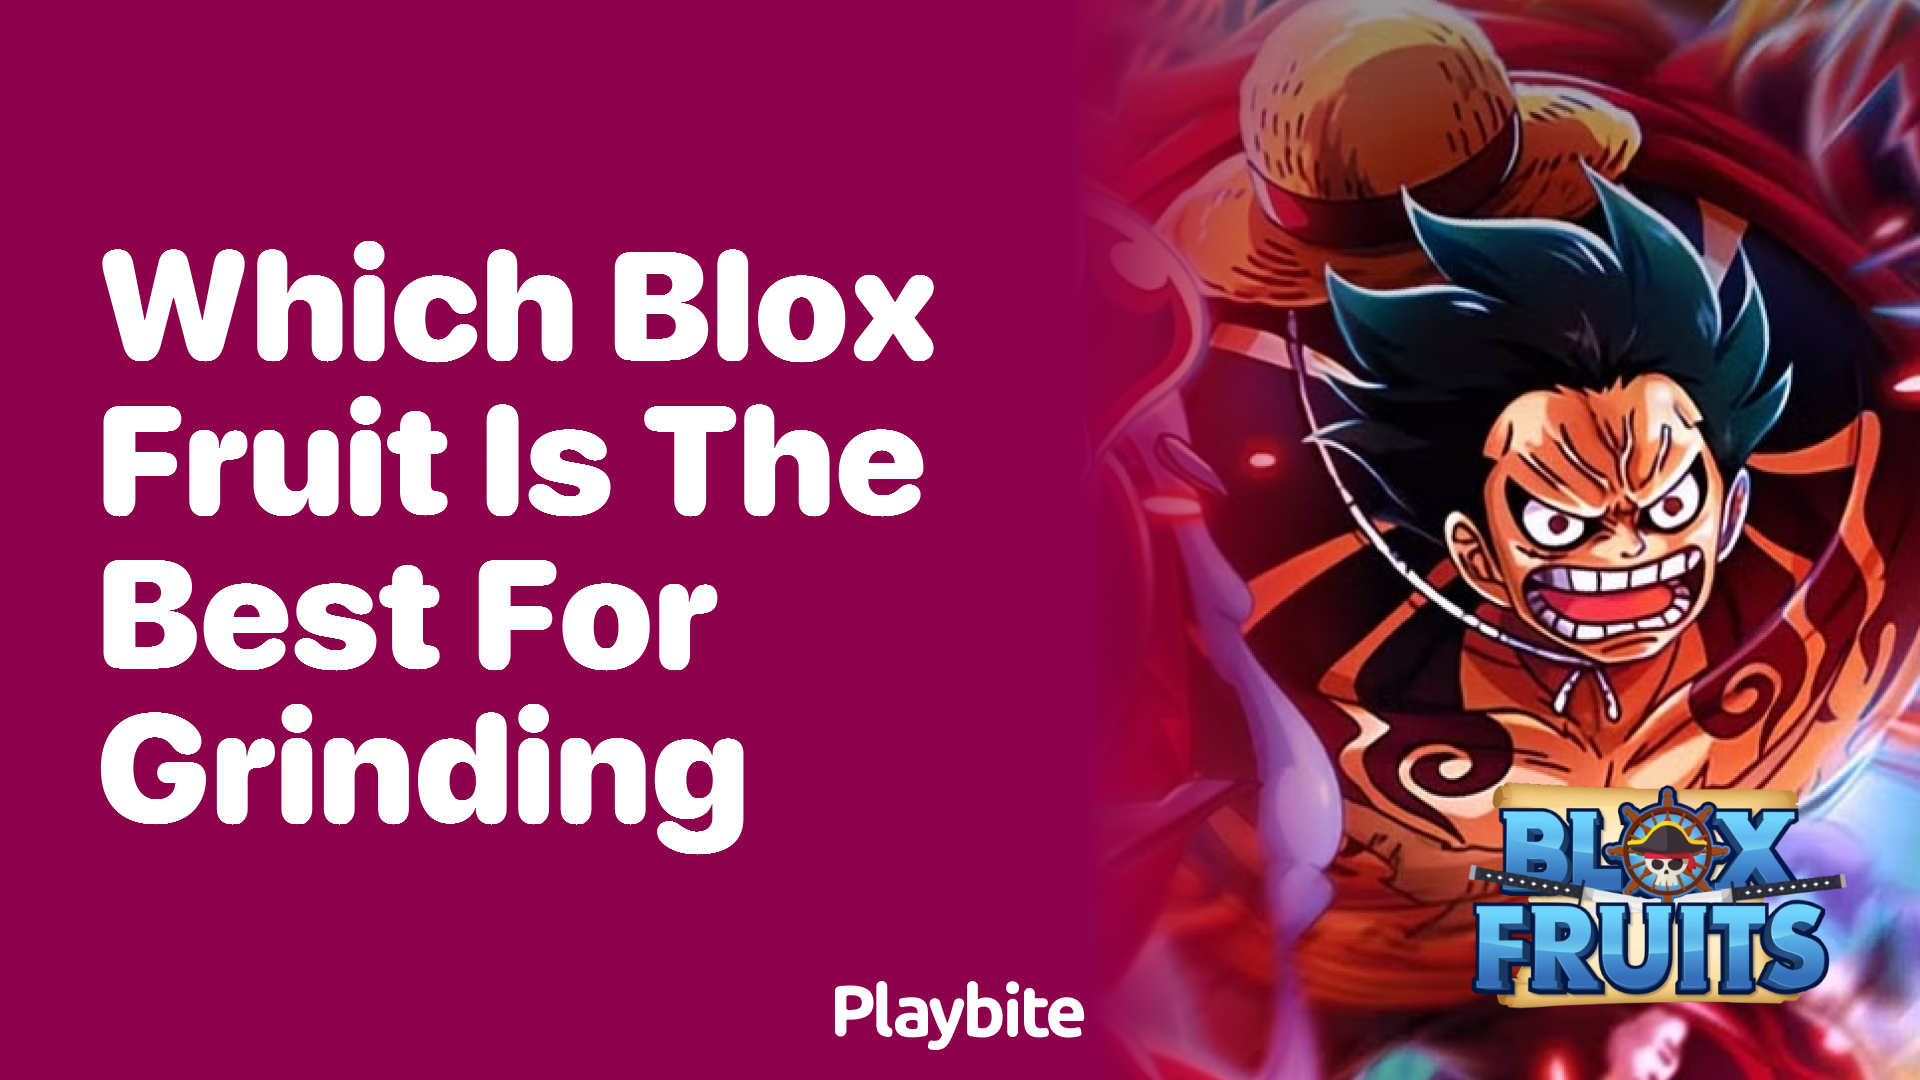 Which Blox Fruit Is the Best for Grinding?